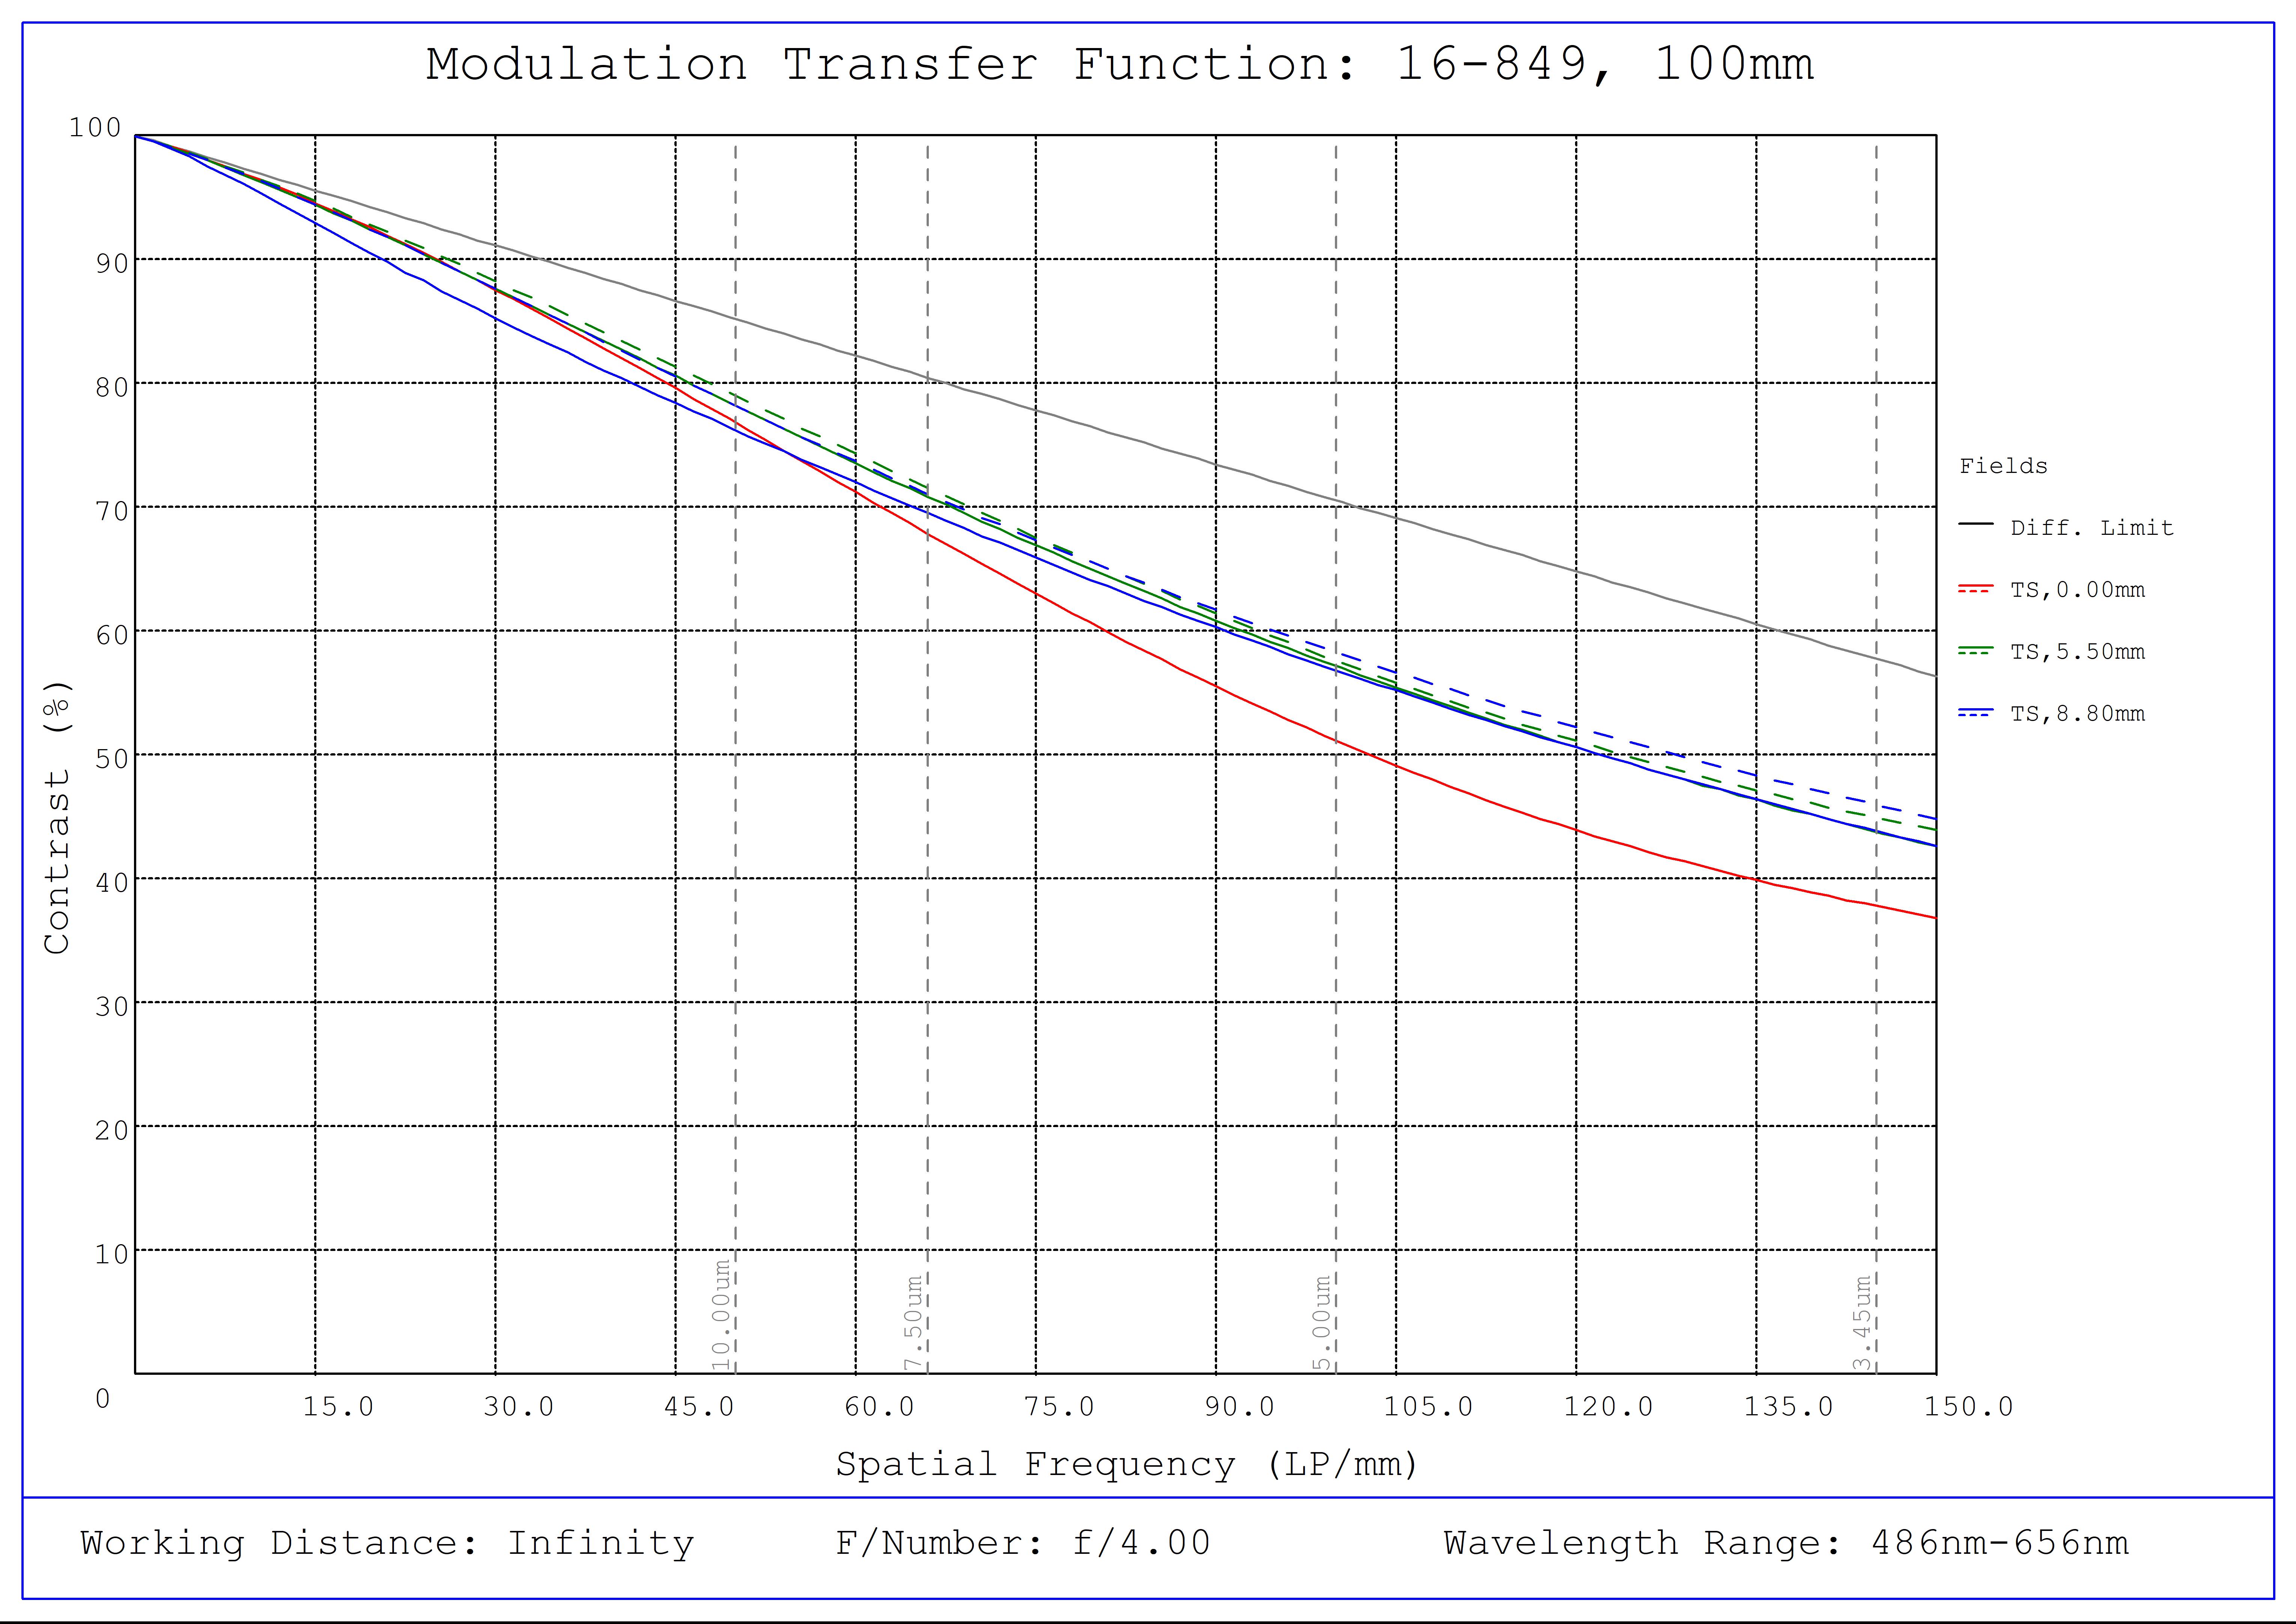 #16-849, 100mm, f/4 Athermal Lens, Modulated Transfer Function (MTF) Plot, Working Distance: Infinity, f4